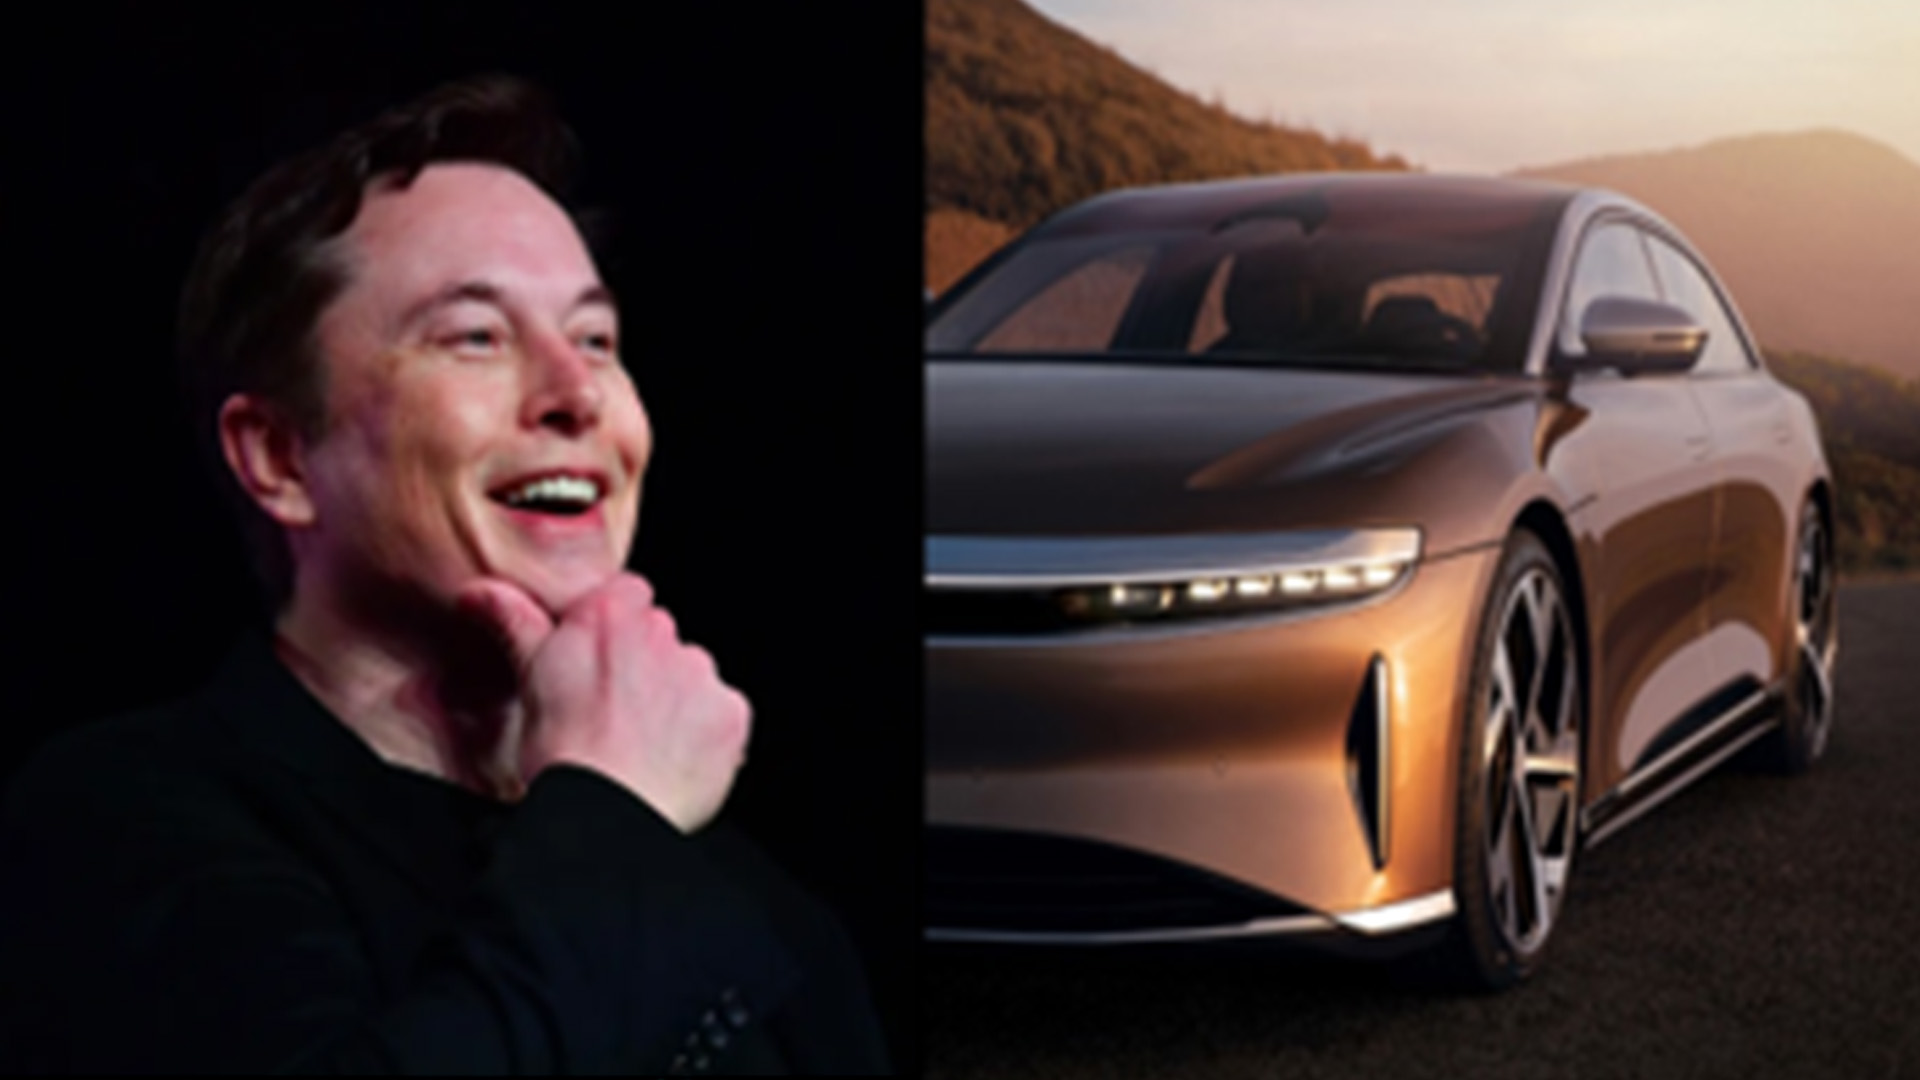 Fully ‘Self-Driving’ Cars within 3 years at around $25000 - Tesla CEO Elon Musk